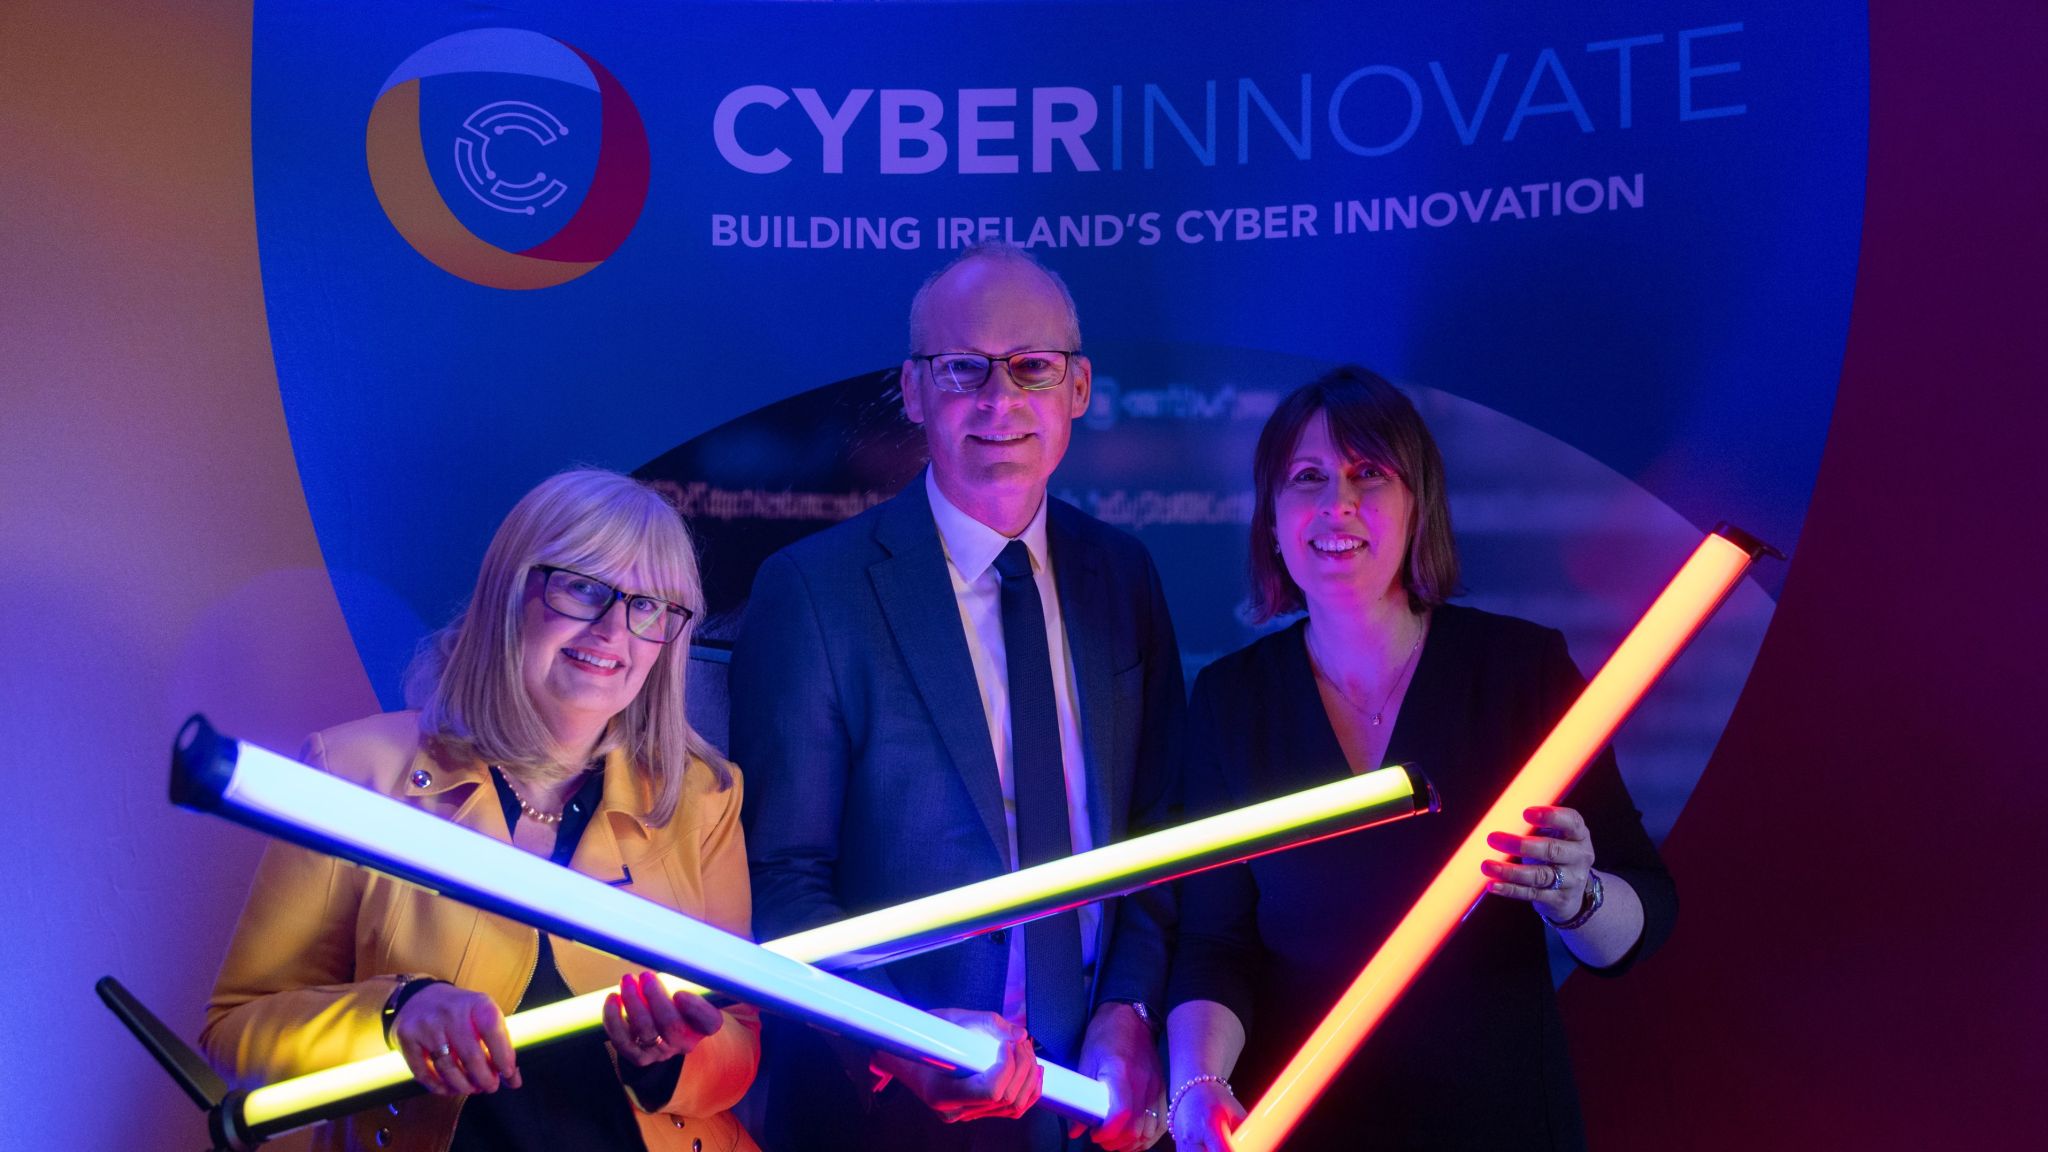 Donna OShea, Josette O'Mullane and Simon Coveney at the Cyber Innovate Launch holding up long LED lights in front of the Cyber Innovate banner in Cork jail.